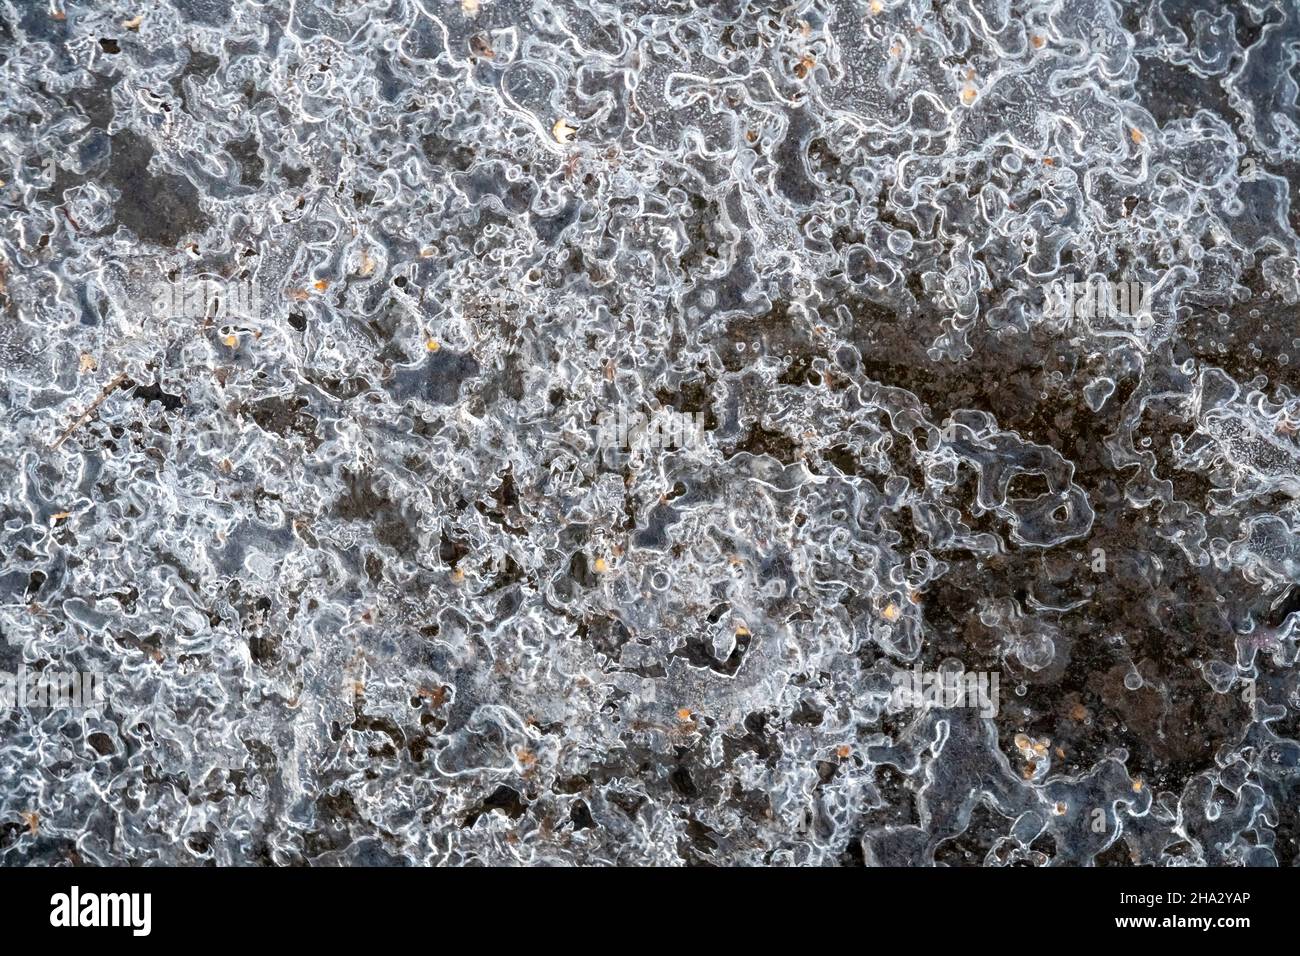 Bubble-frozen ice with Russian white birch seeds in a puddle on the ground in late autumn. Stock Photo